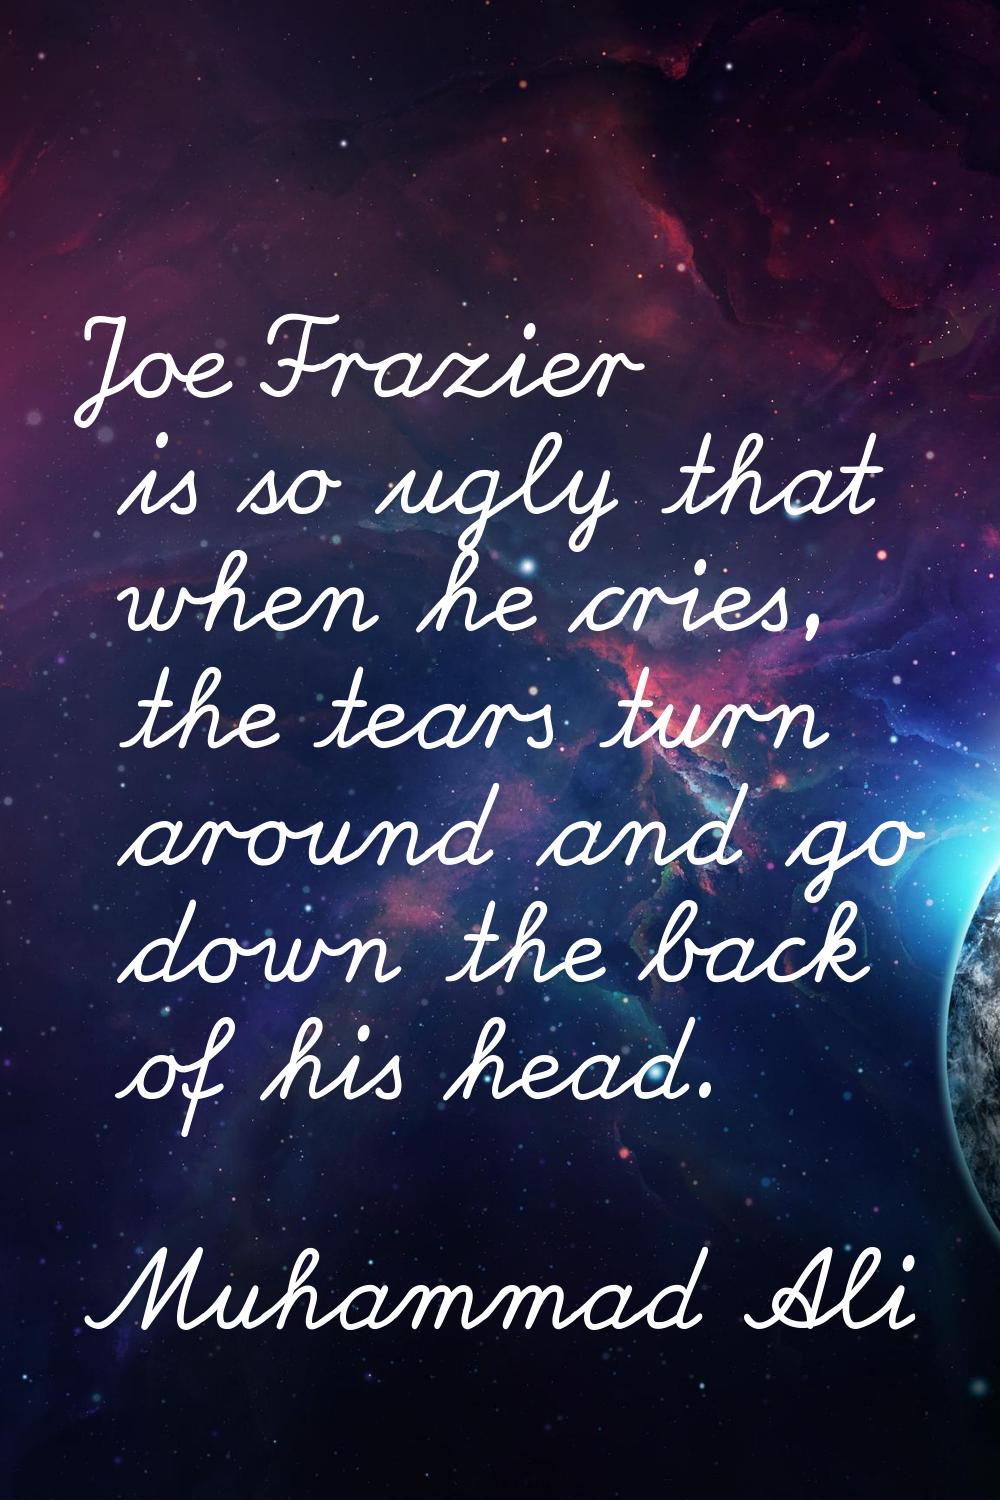 Joe Frazier is so ugly that when he cries, the tears turn around and go down the back of his head.